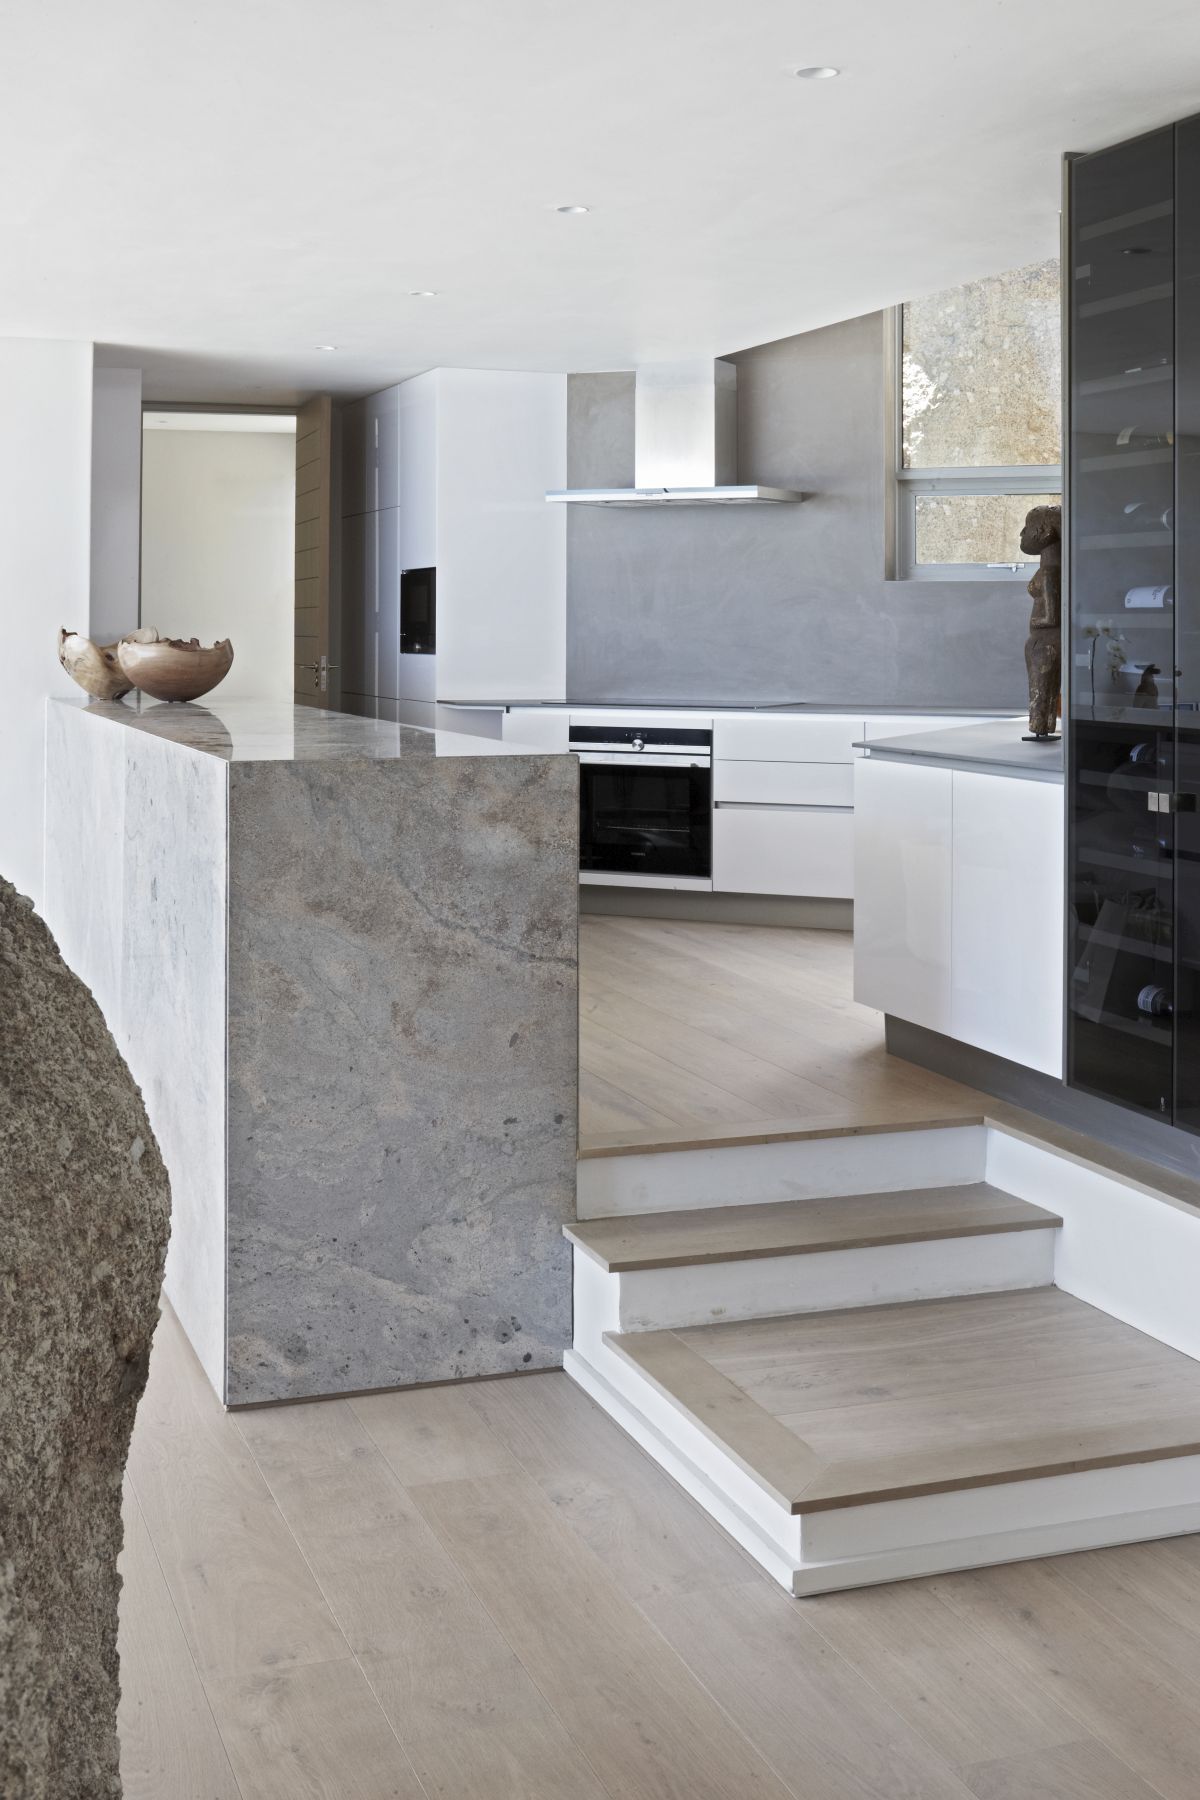 The kitchen is done in white and grey, the kitchen island is done in stone and there are cool views